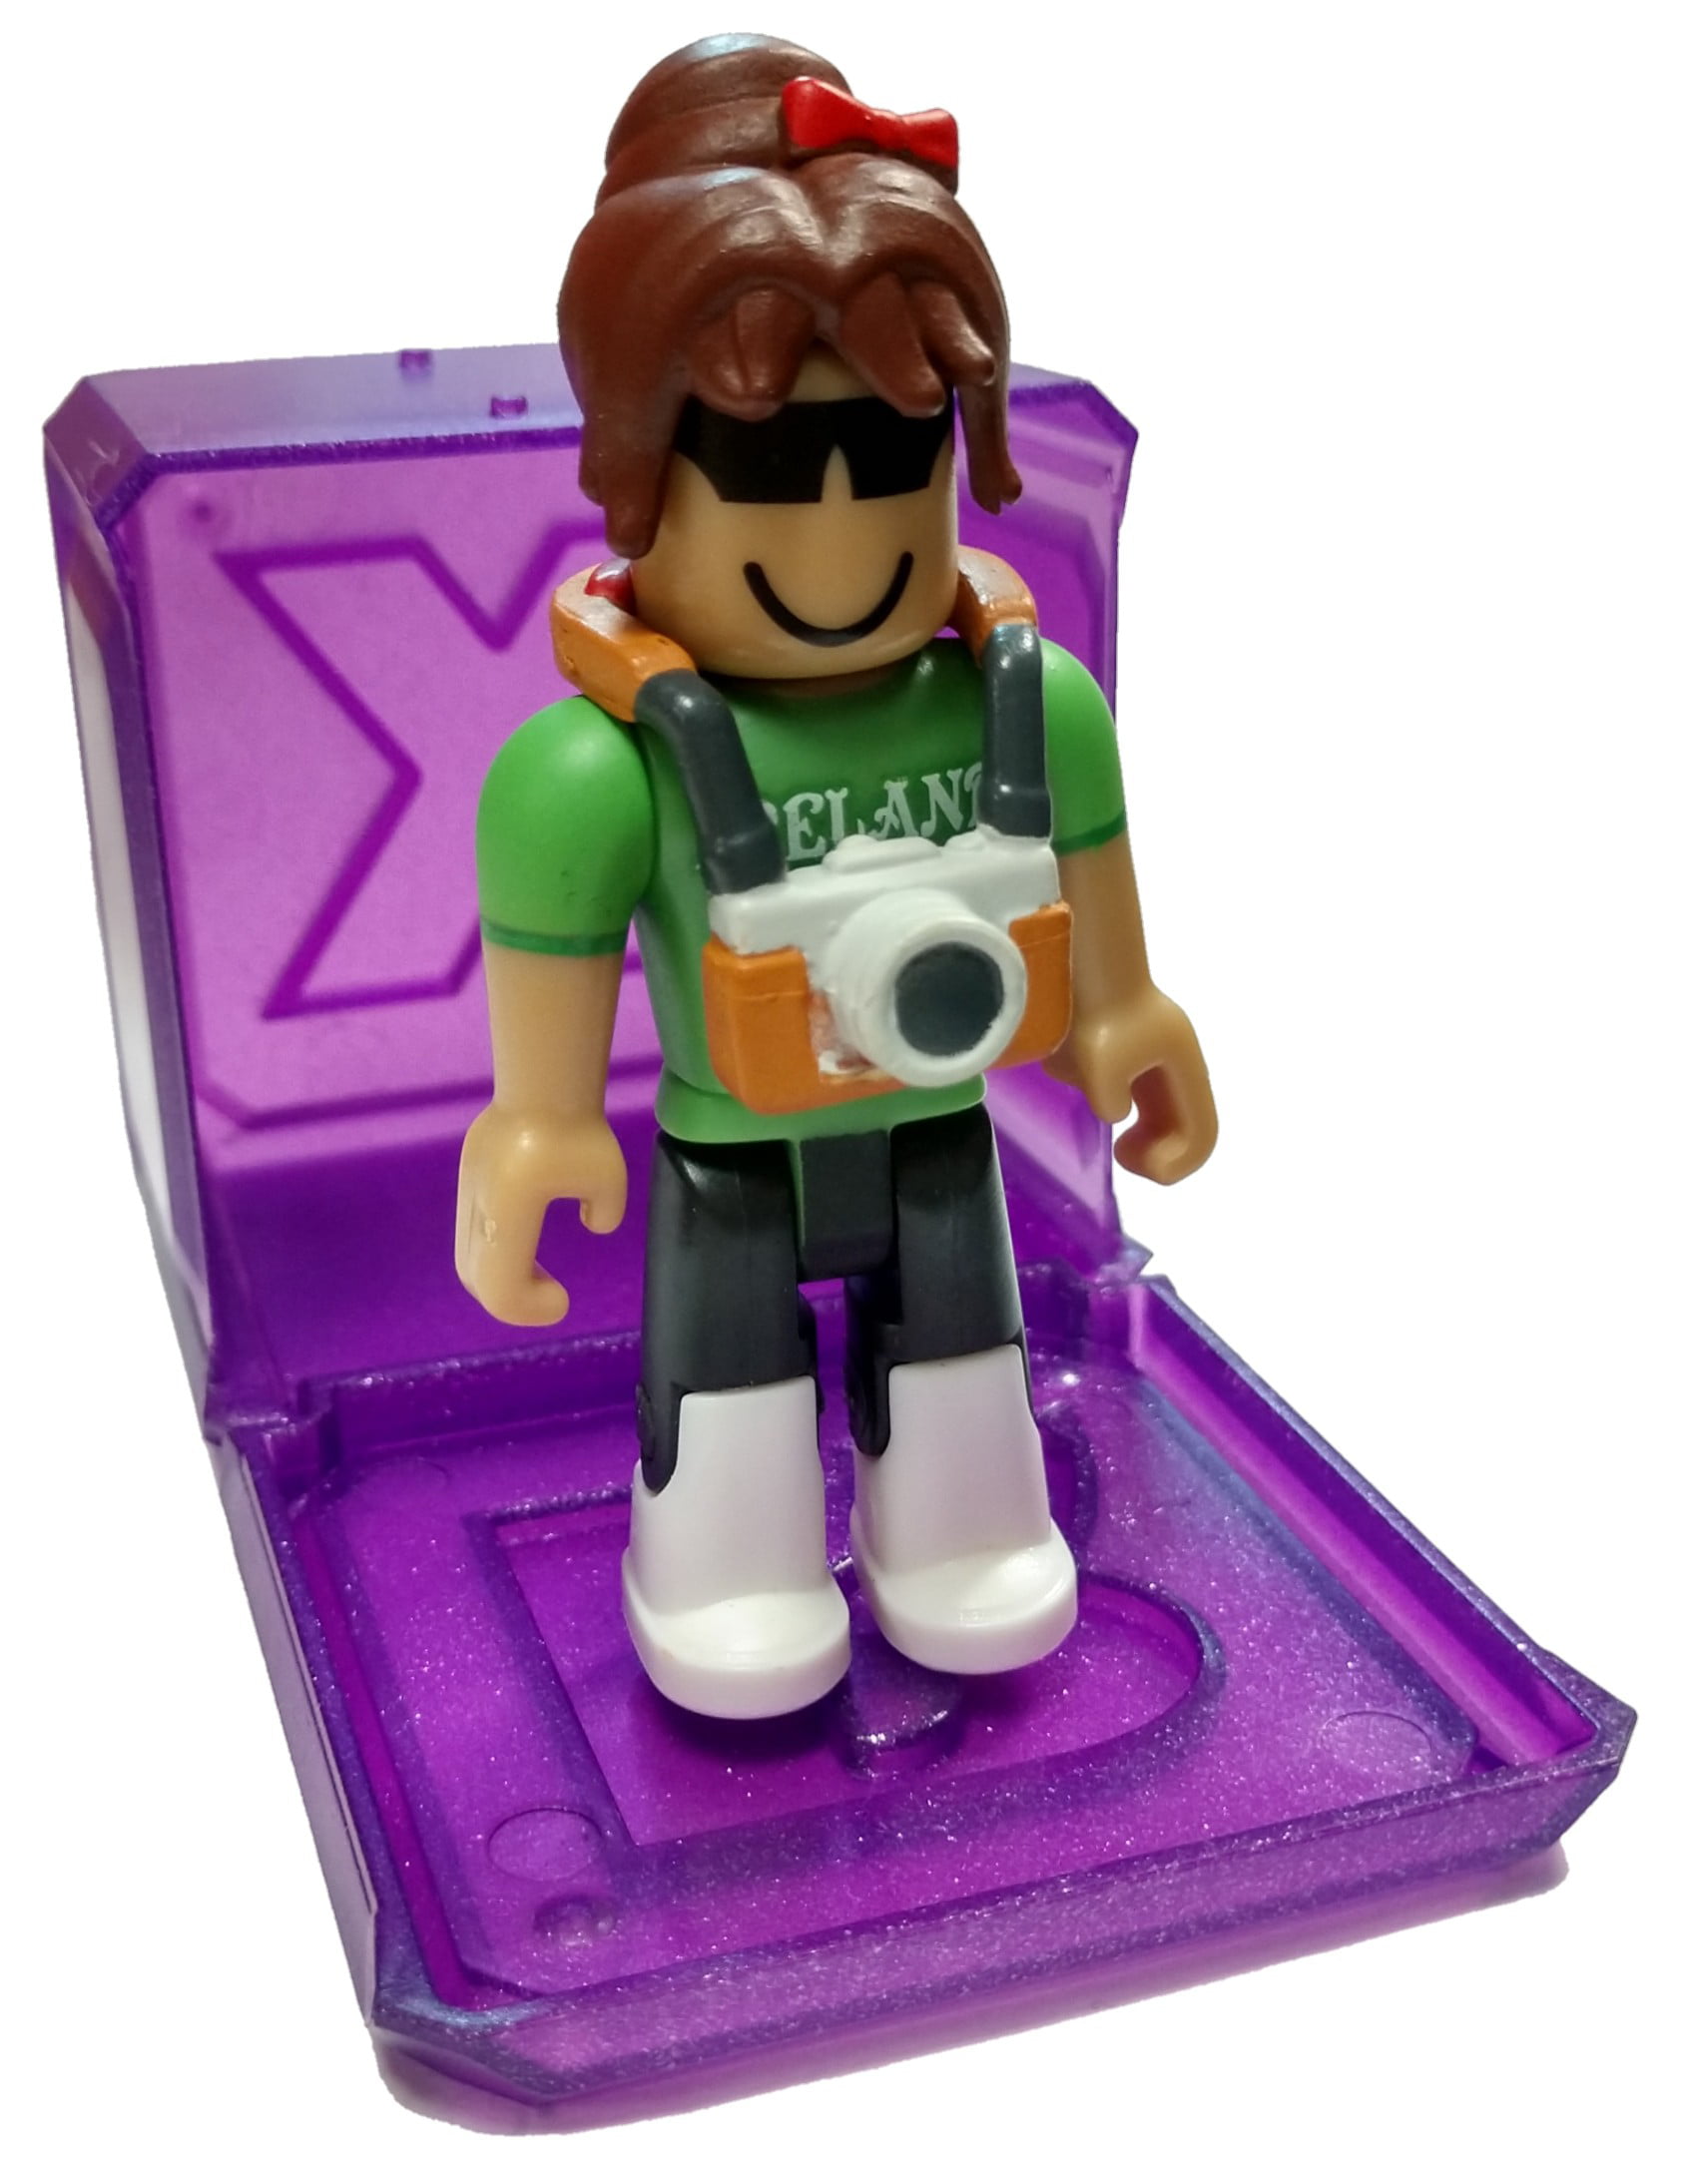 Where To Get Roblox Gift Cards In Ireland - where can i buy roblox gift cards in ireland